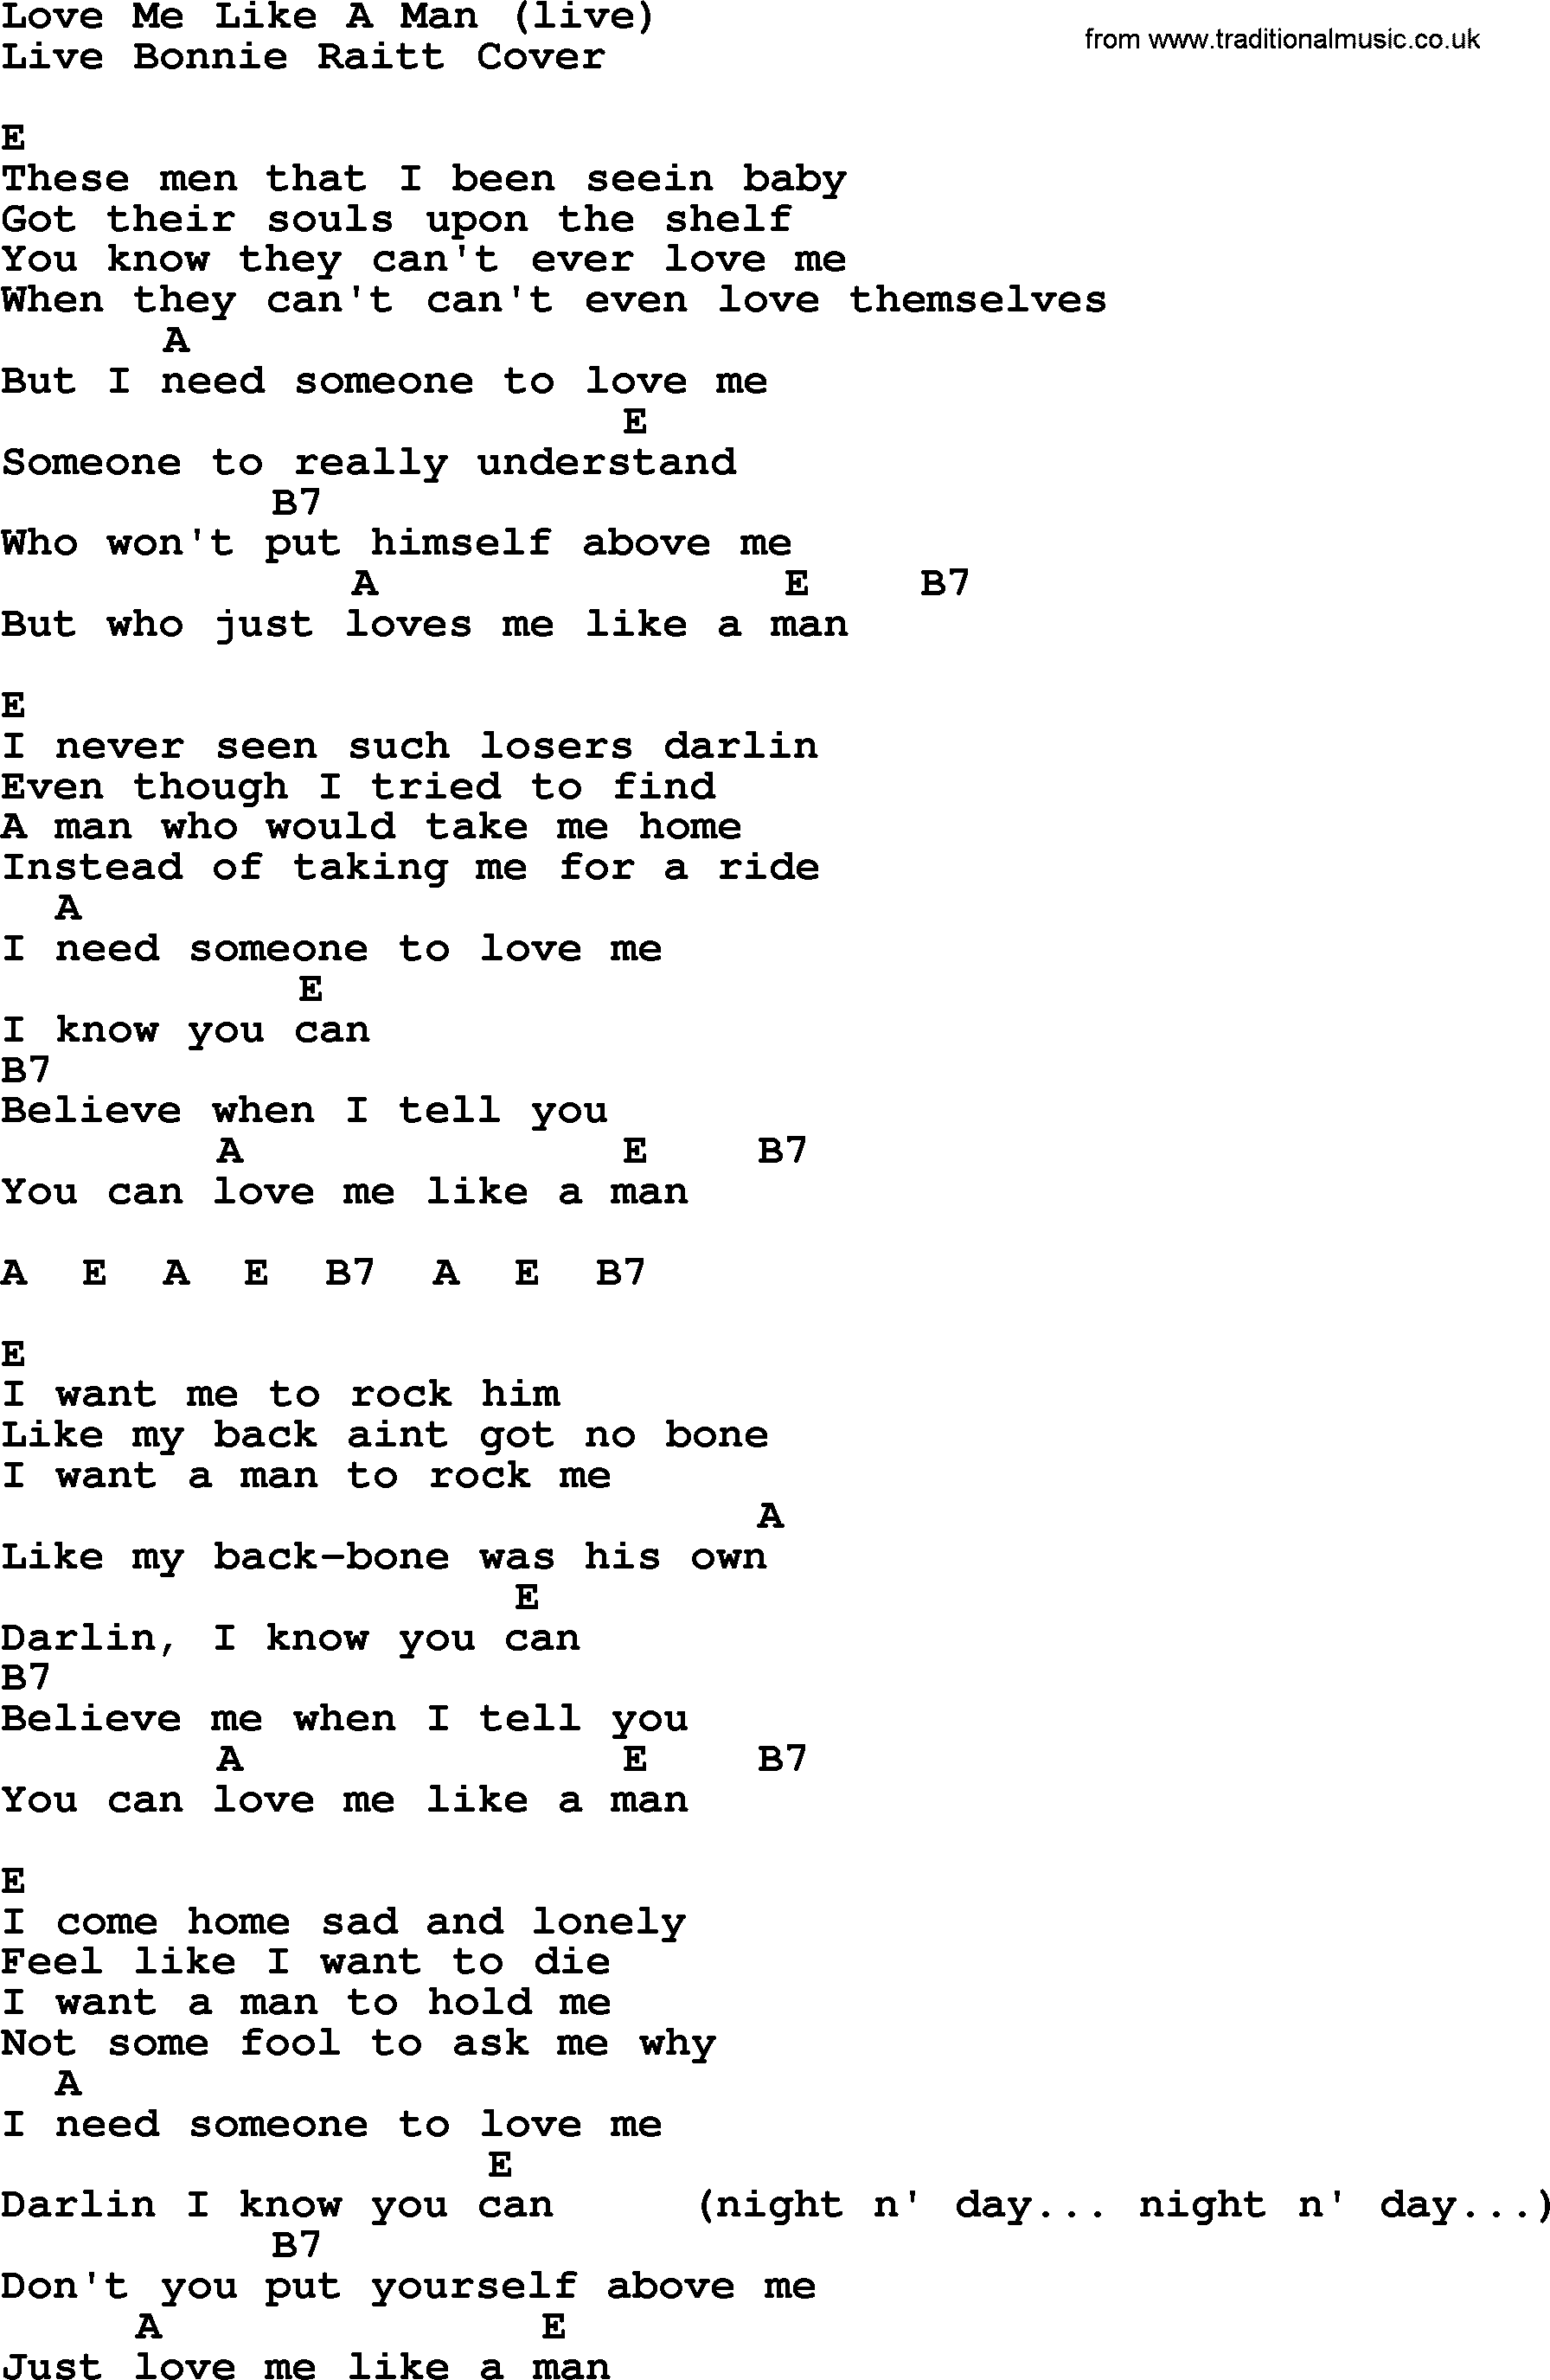 Bluegrass song: Love Me Like A Man (Live), lyrics and chords